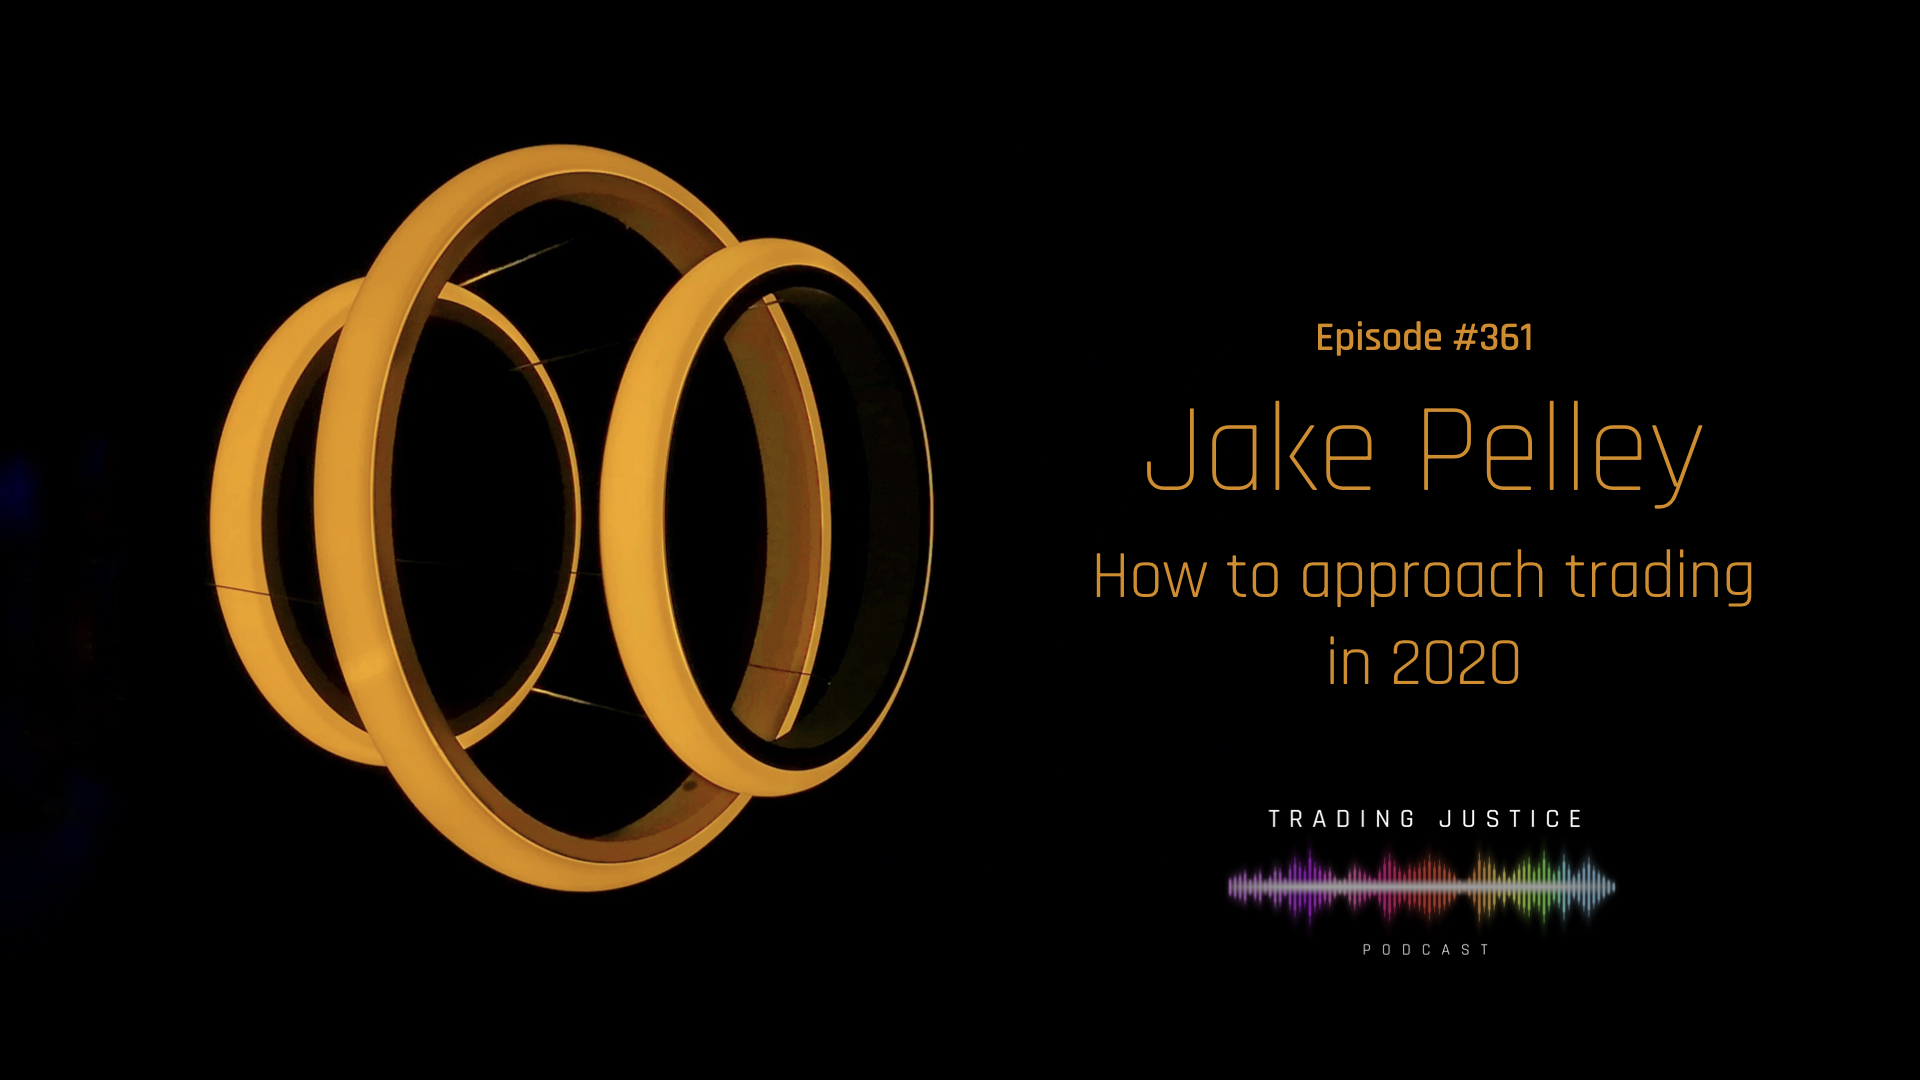 Episode 361: Jake Pelley on how to approach trading in 2020 (Photo by Piradeep K on Unsplash)